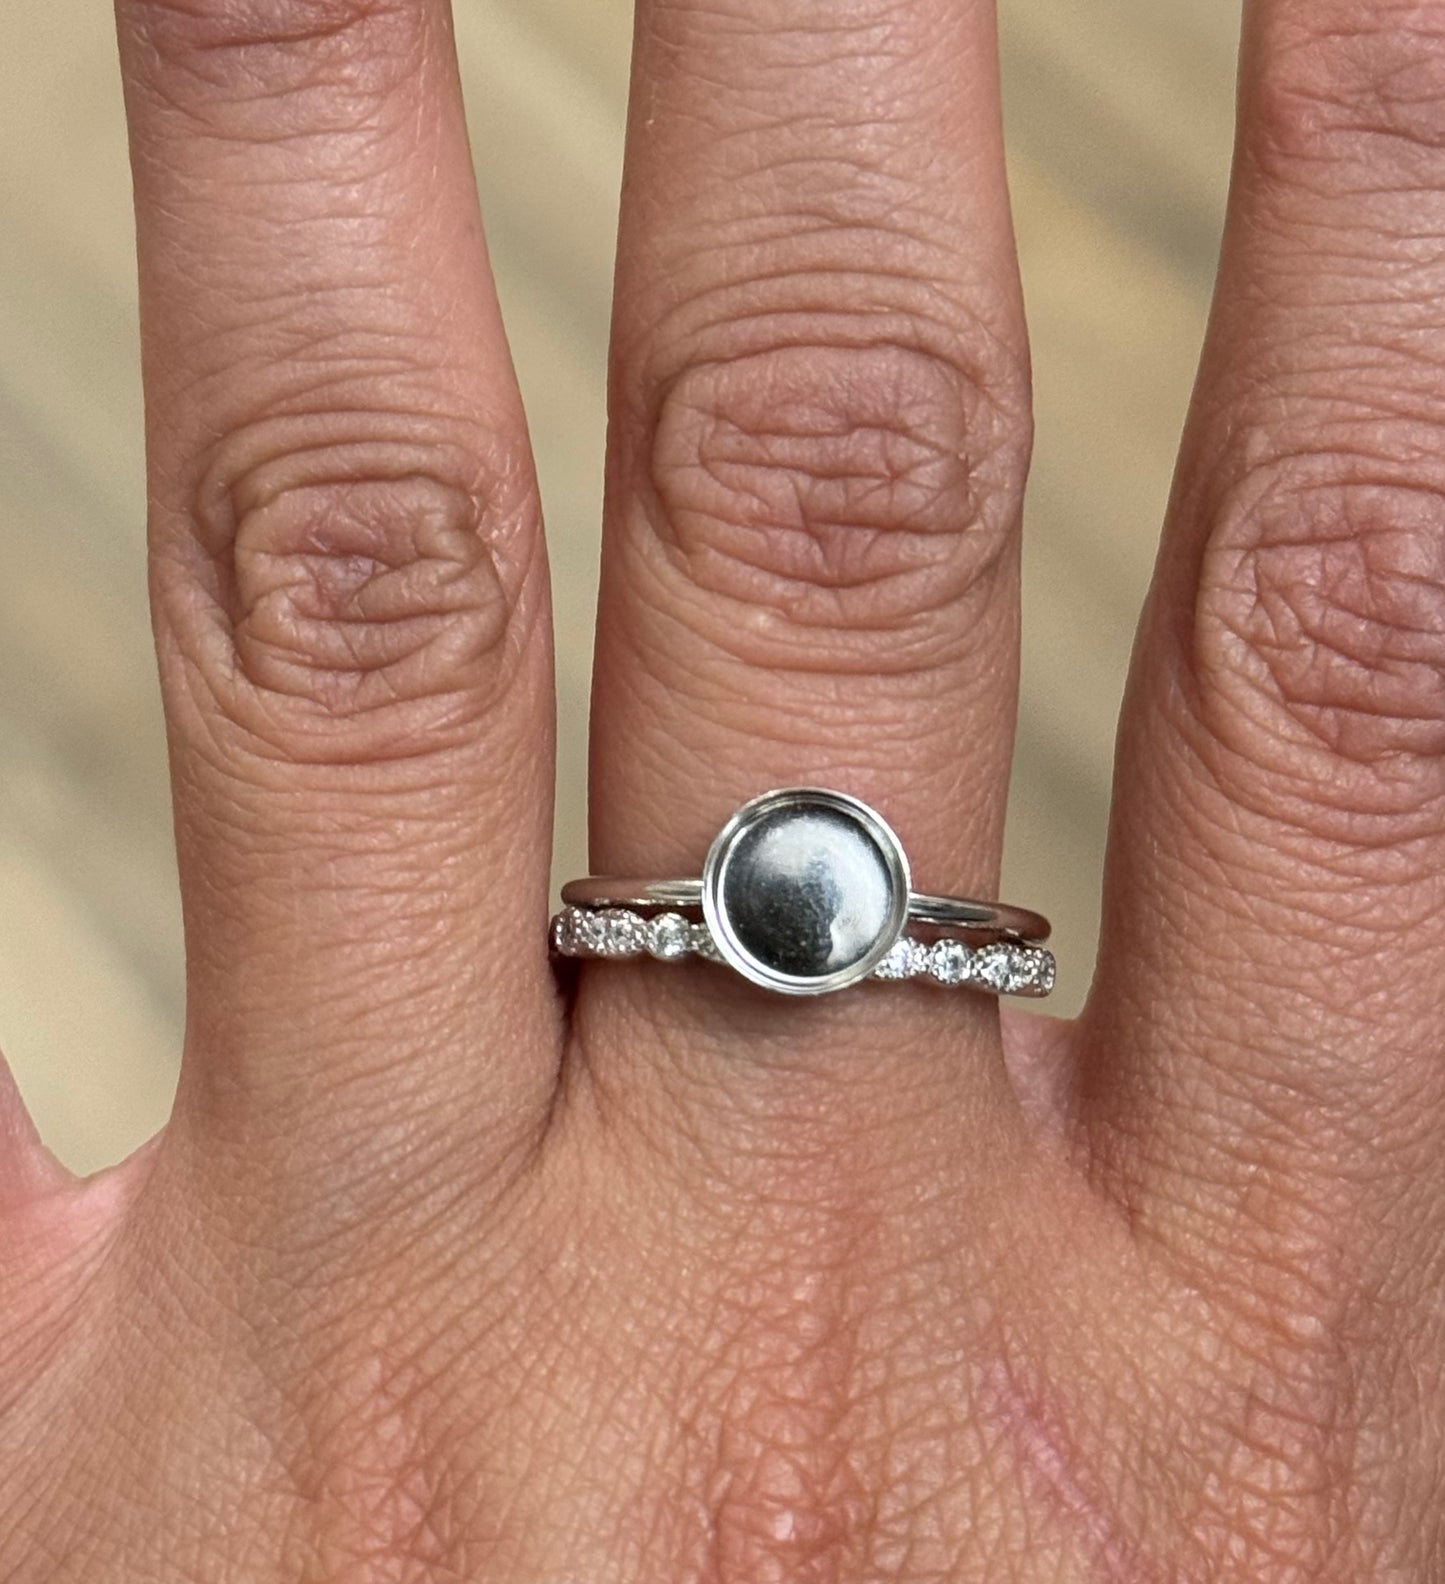 Full moon 8mm + stacker ring set
About size 9.5
Sterling silver cz 
$155